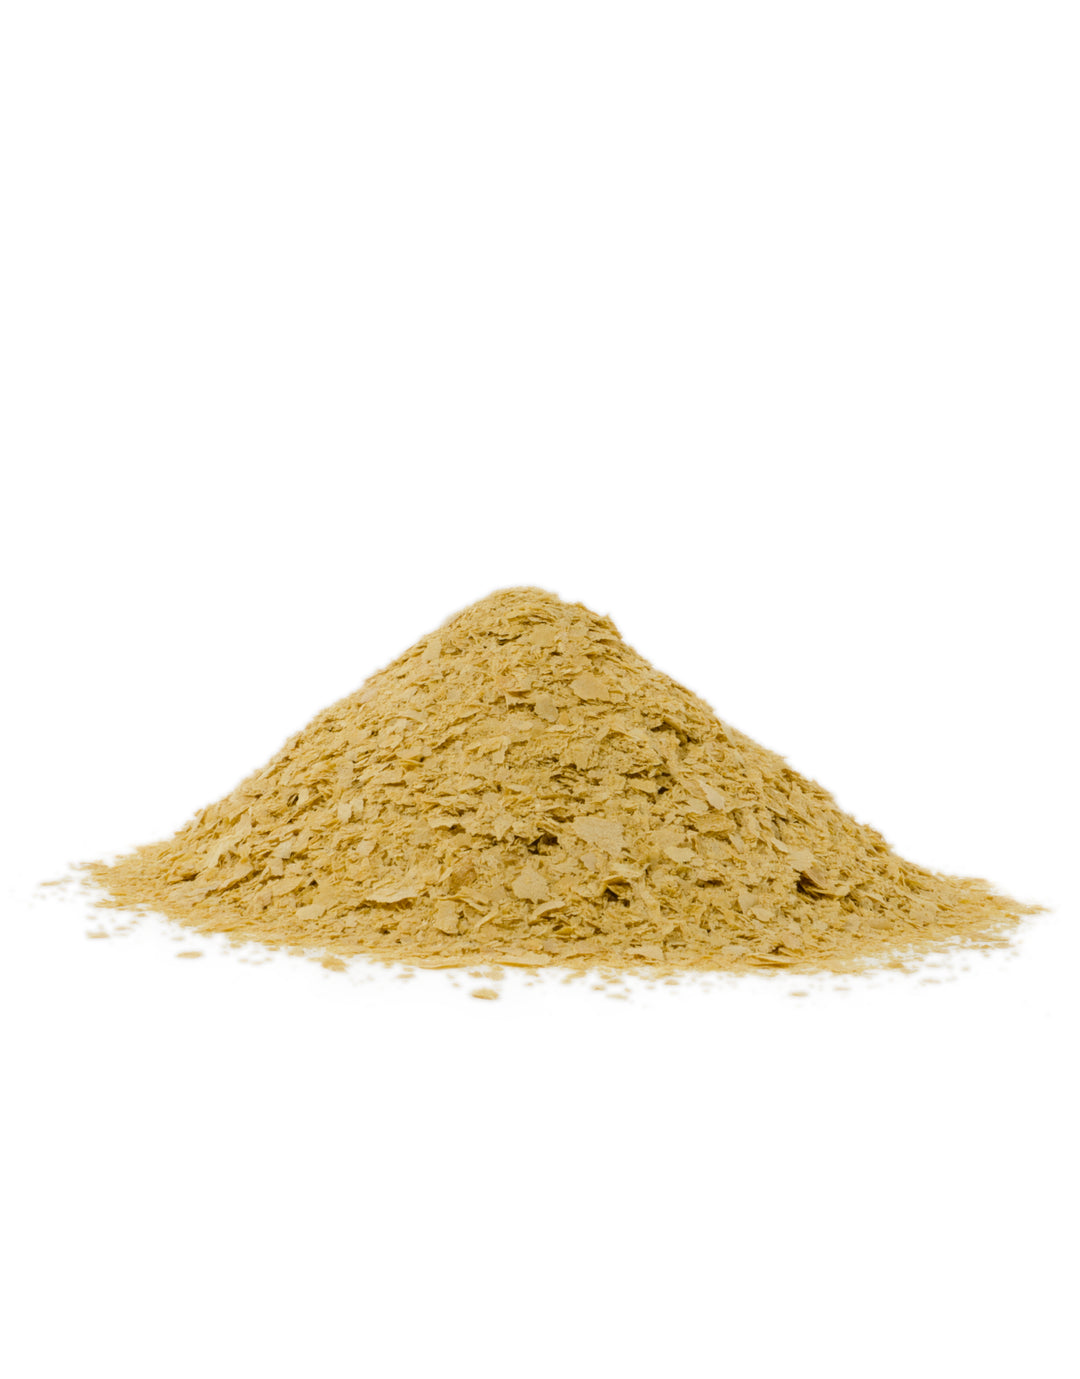 Bob's Red Mill Natural Foods Inc Nutritional Yeast-25 lb.